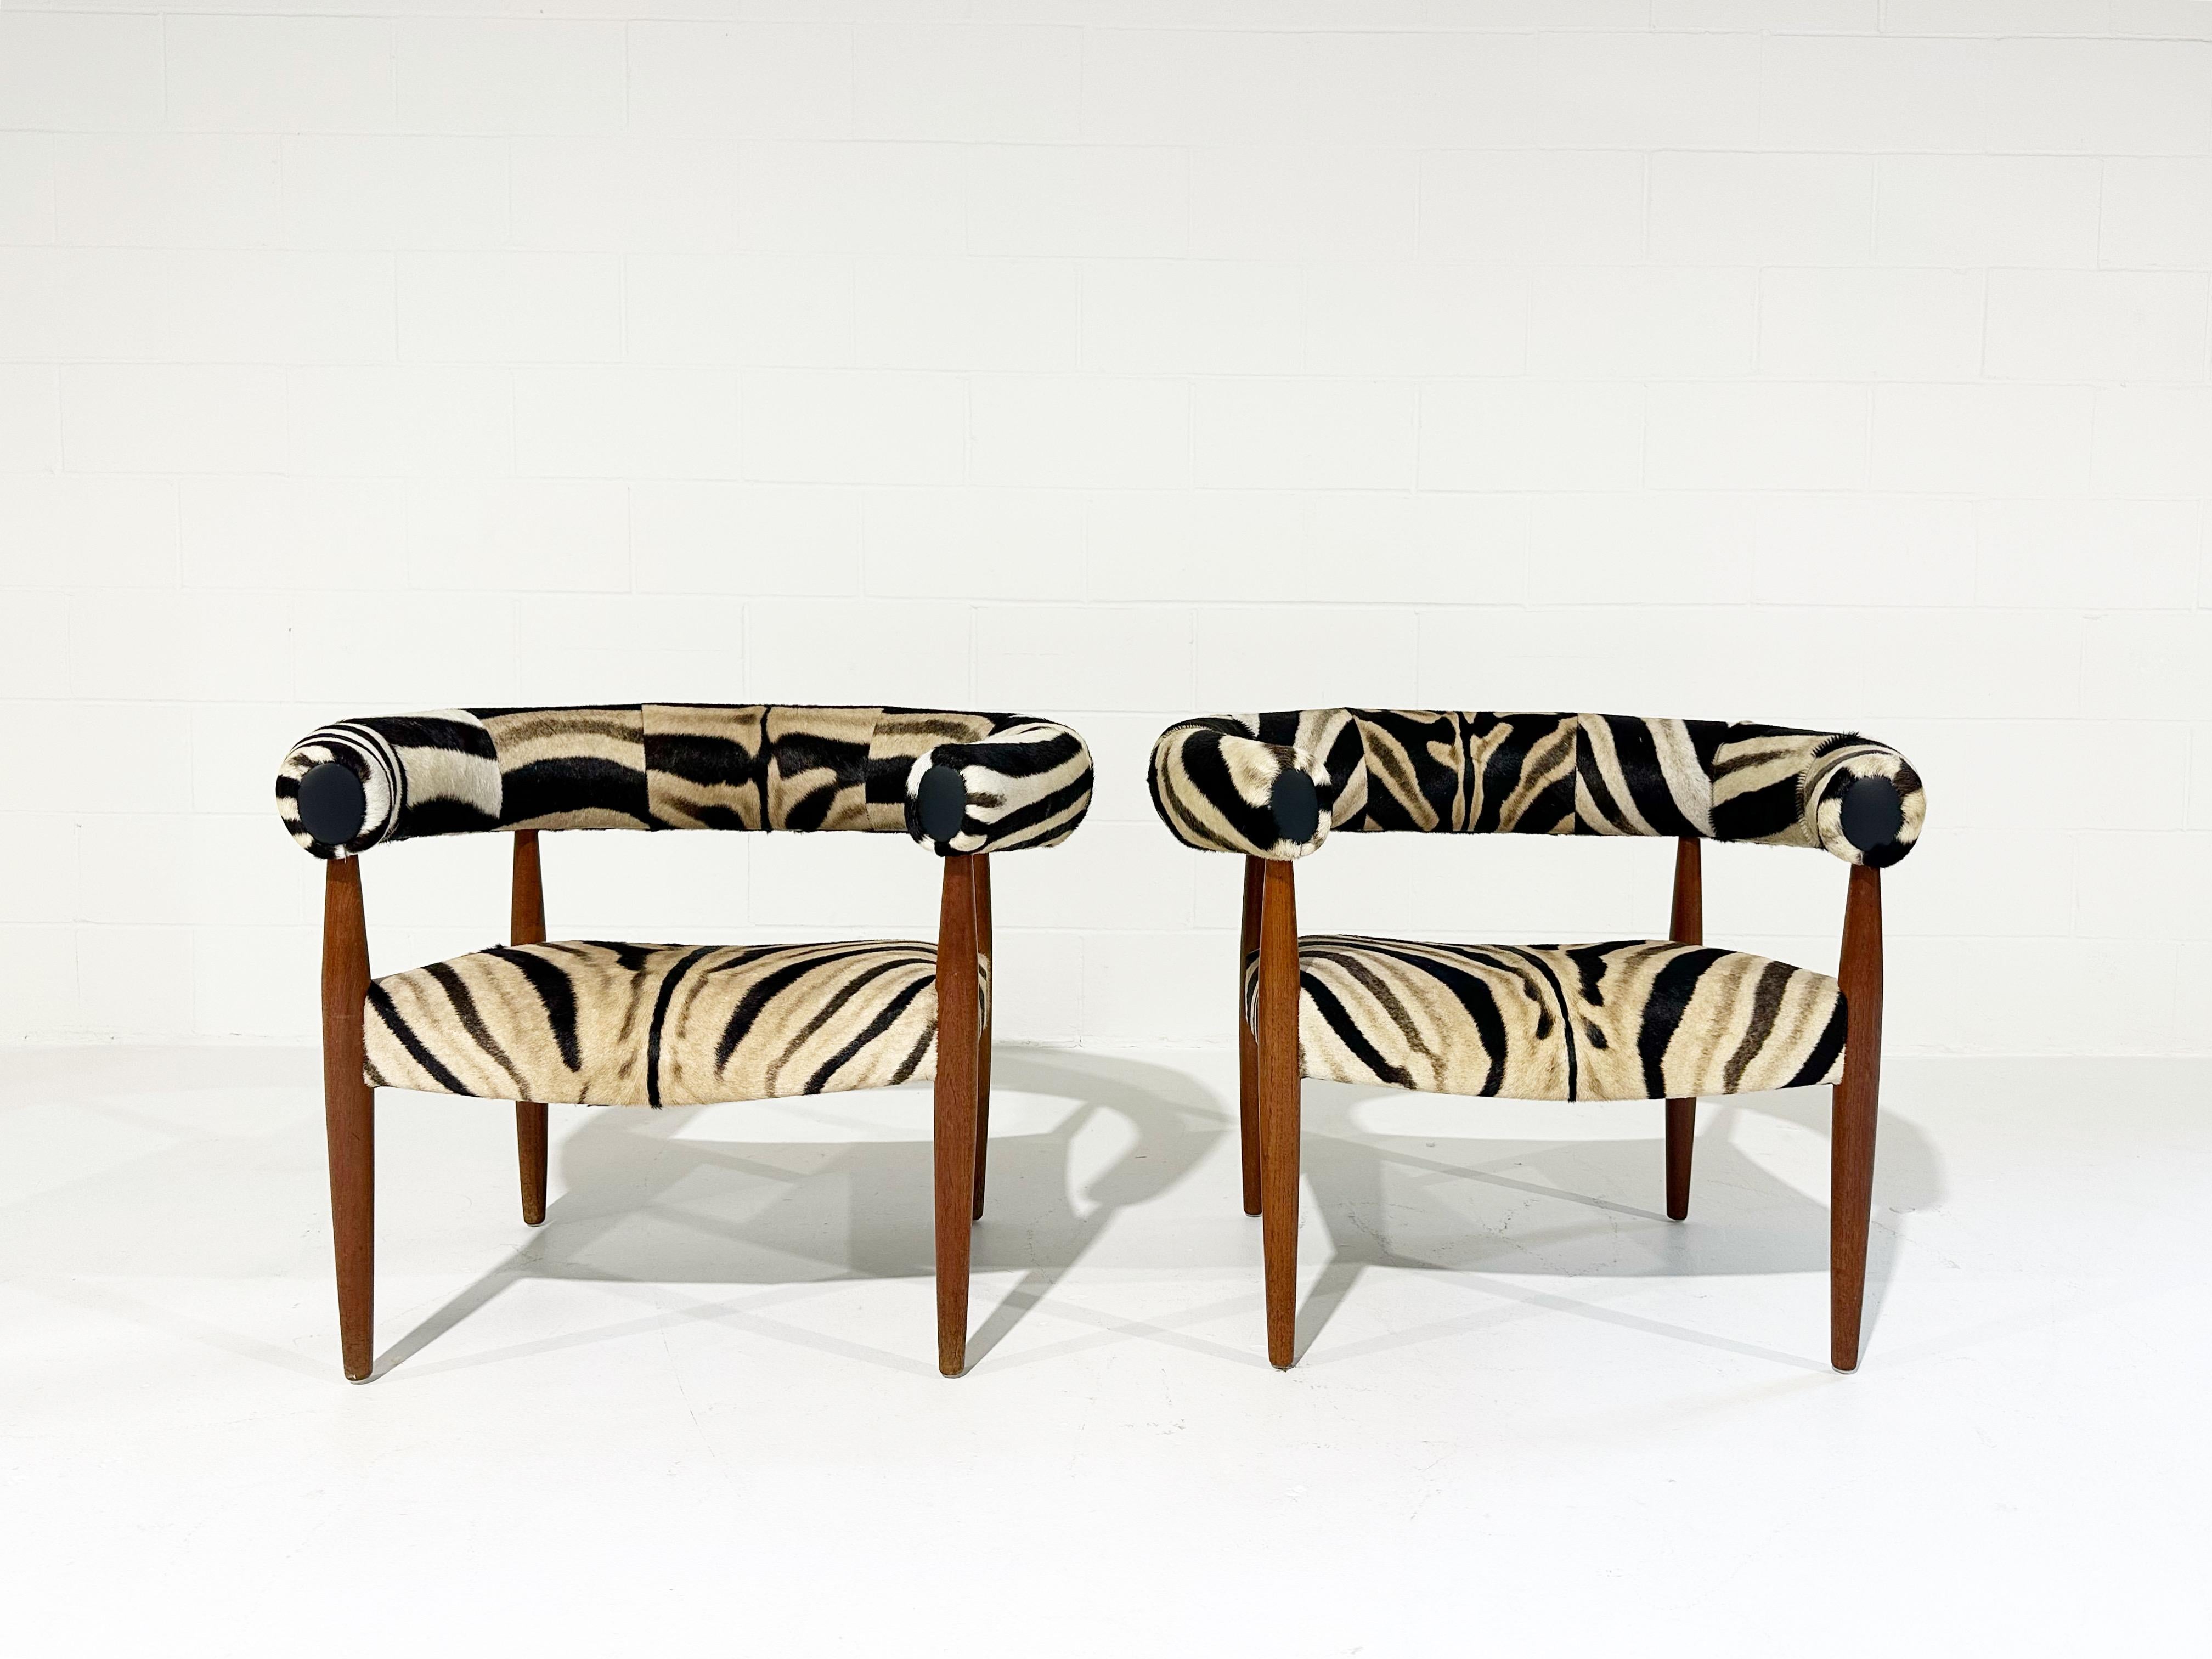 Vintage Nanna and Jorgen Ditzel Ring Lounge Chairs in Zebra Hide For Sale 6